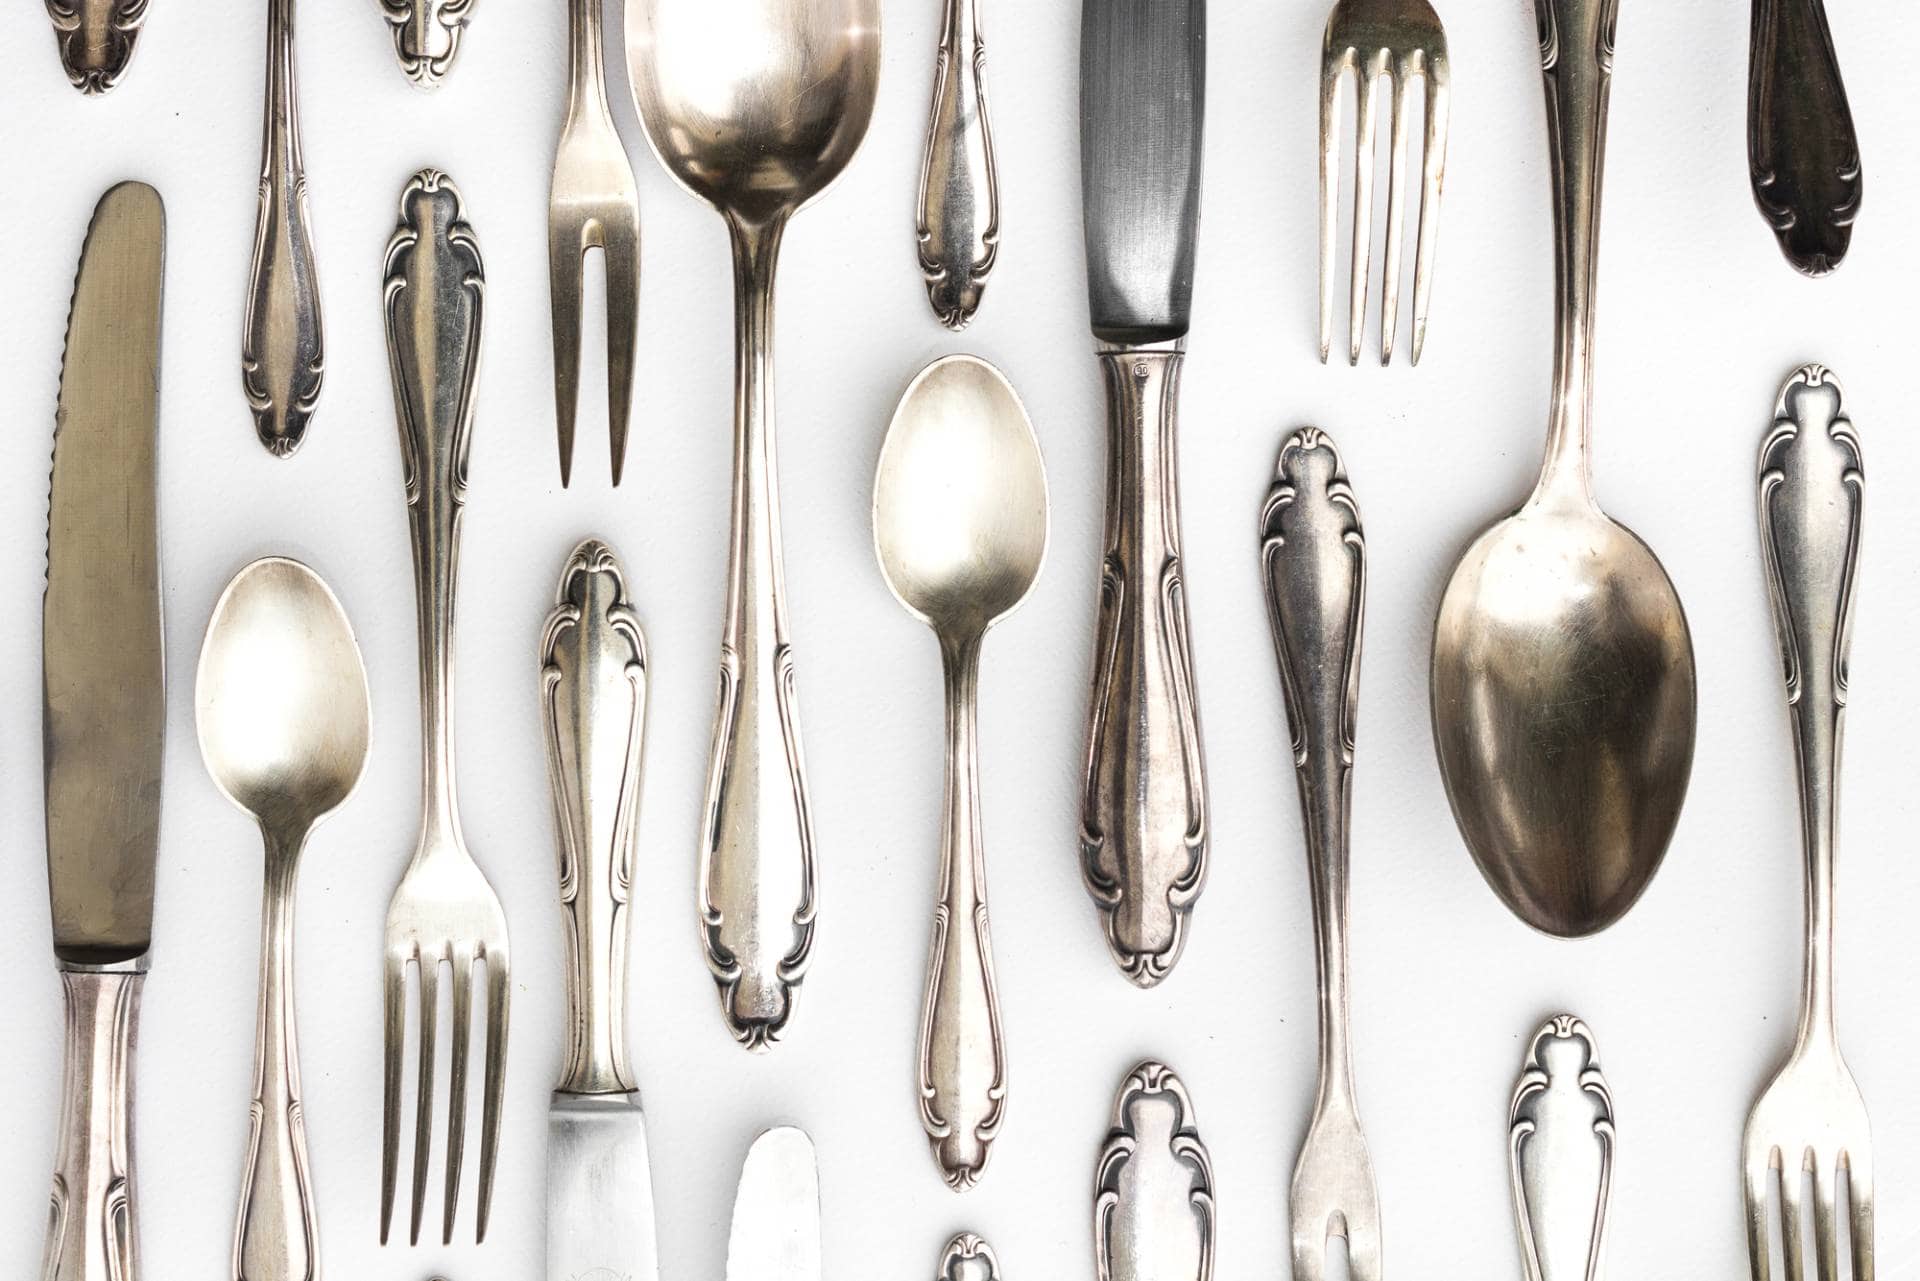 Who makes the best cutlery?